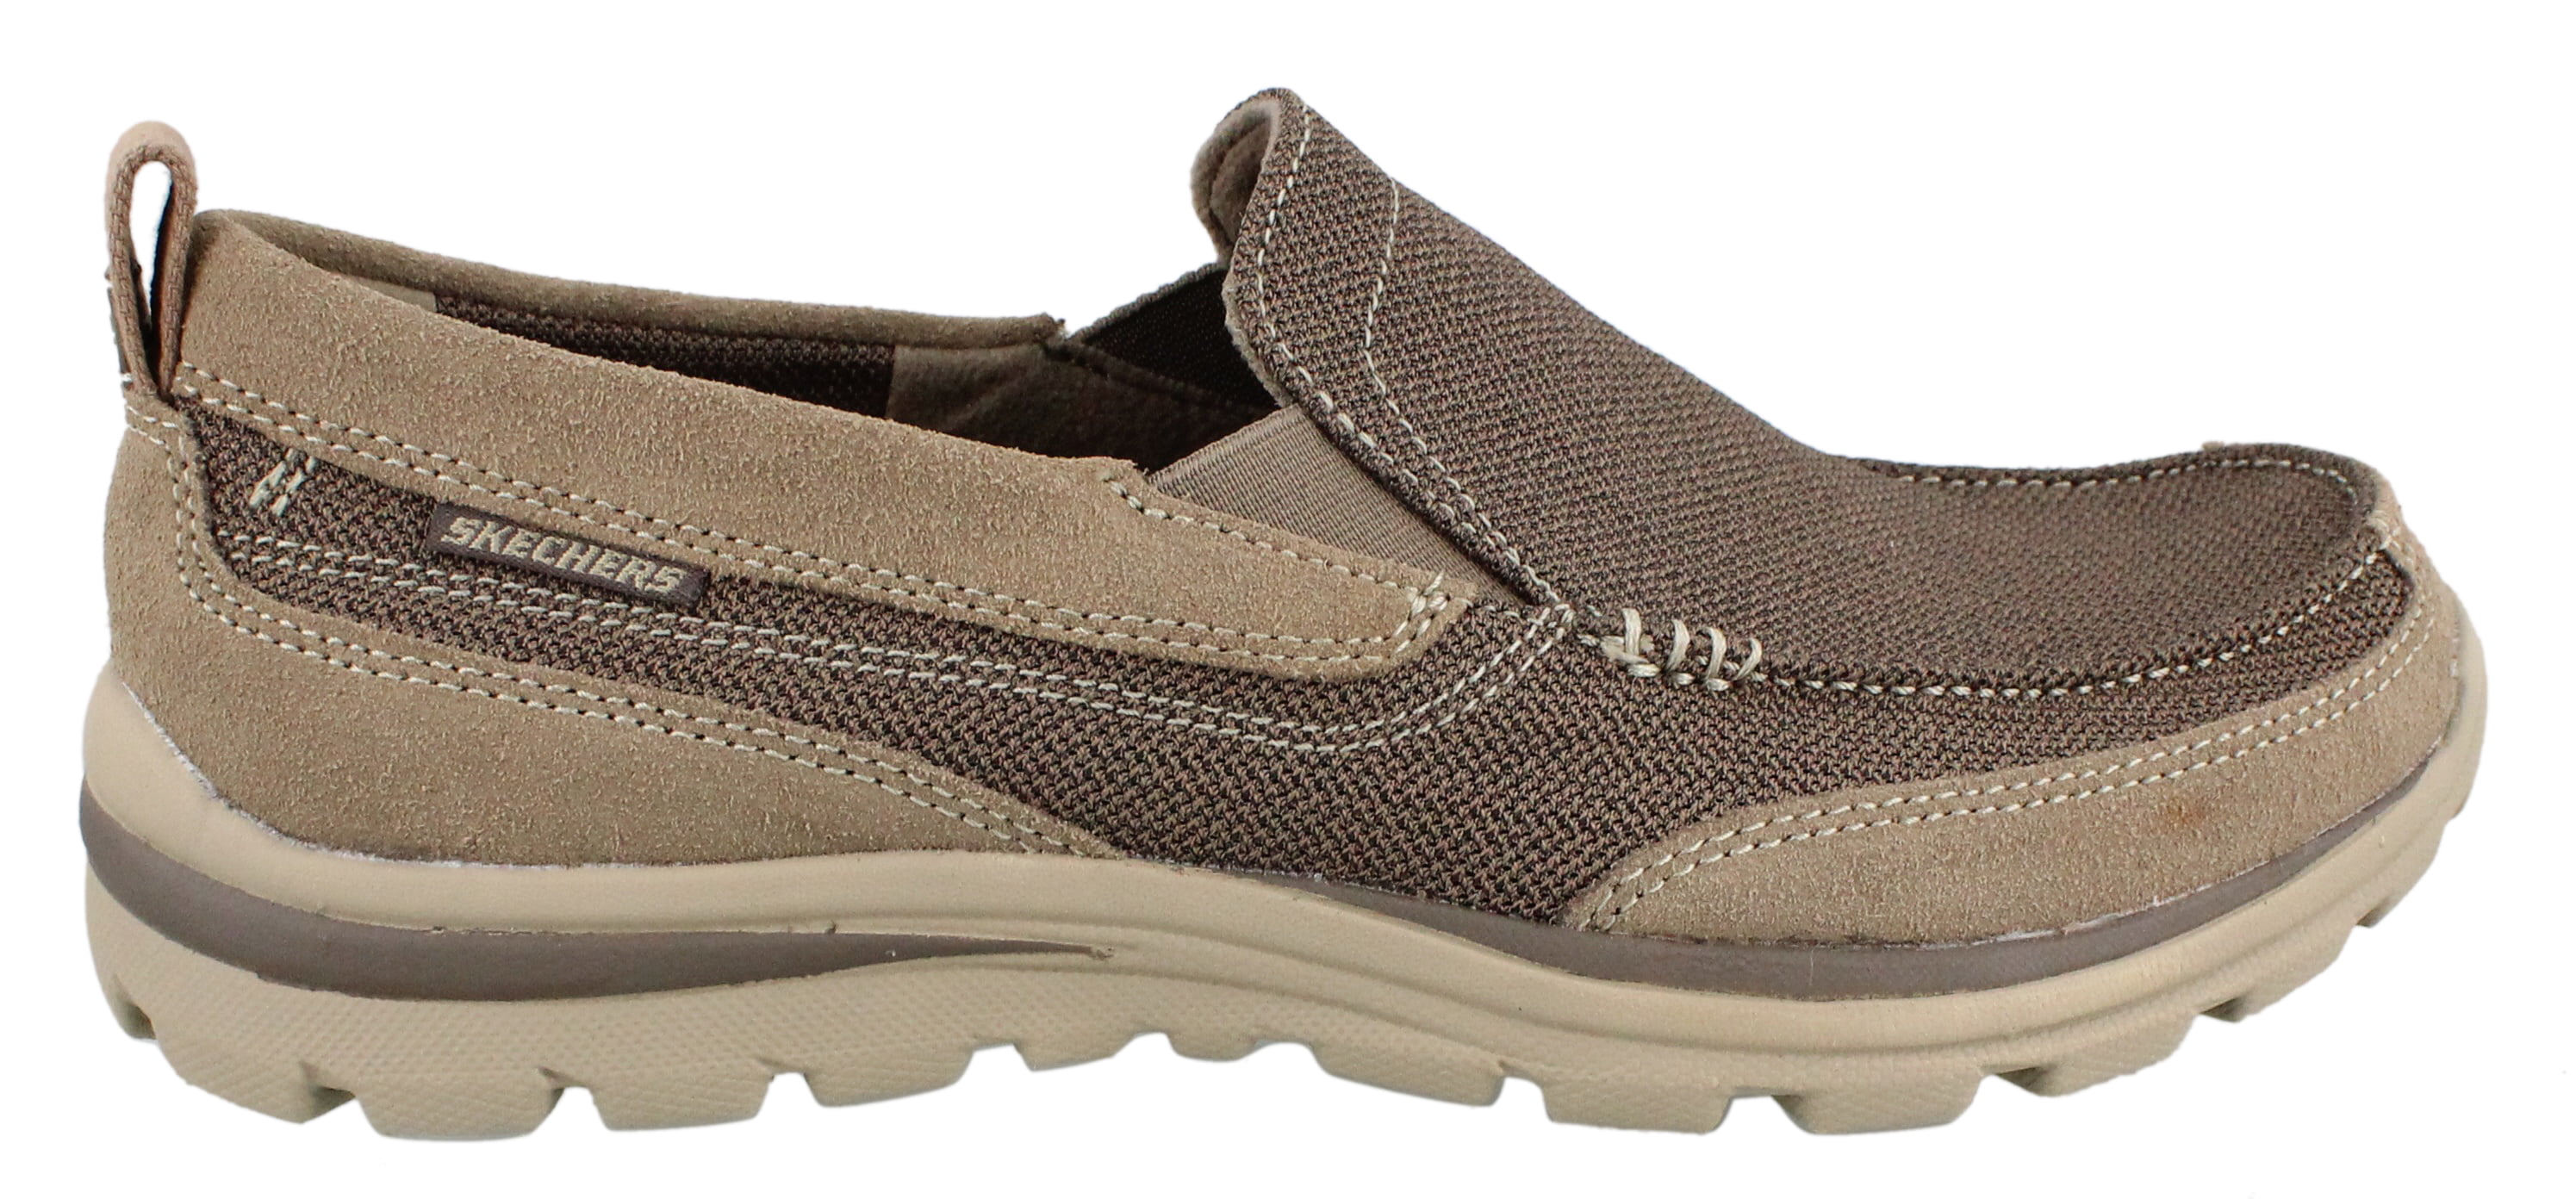 Skechers Relaxed Fit Superior Milford 